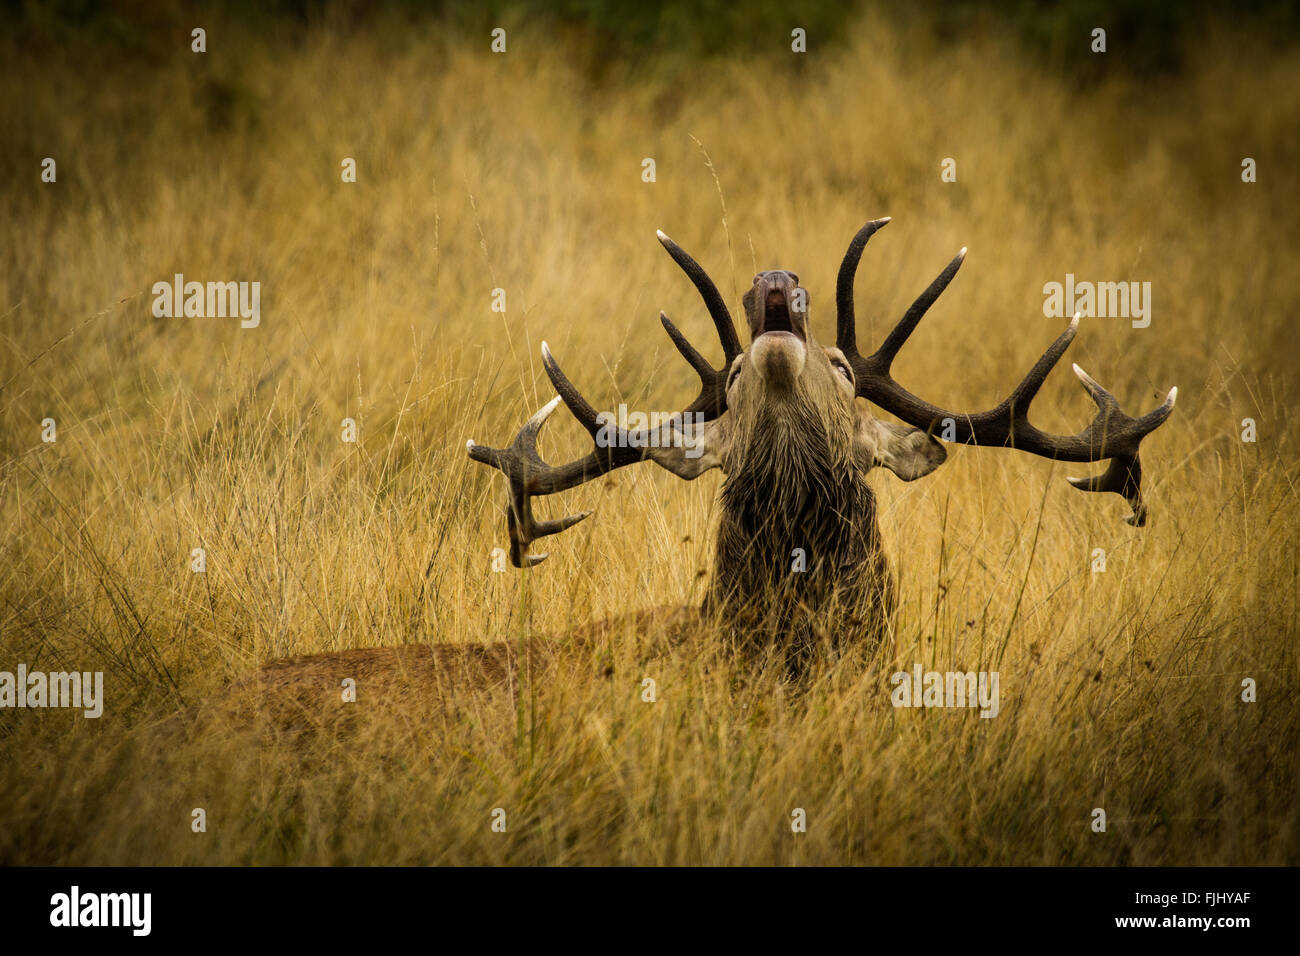 Bellowing Stag Stock Photo